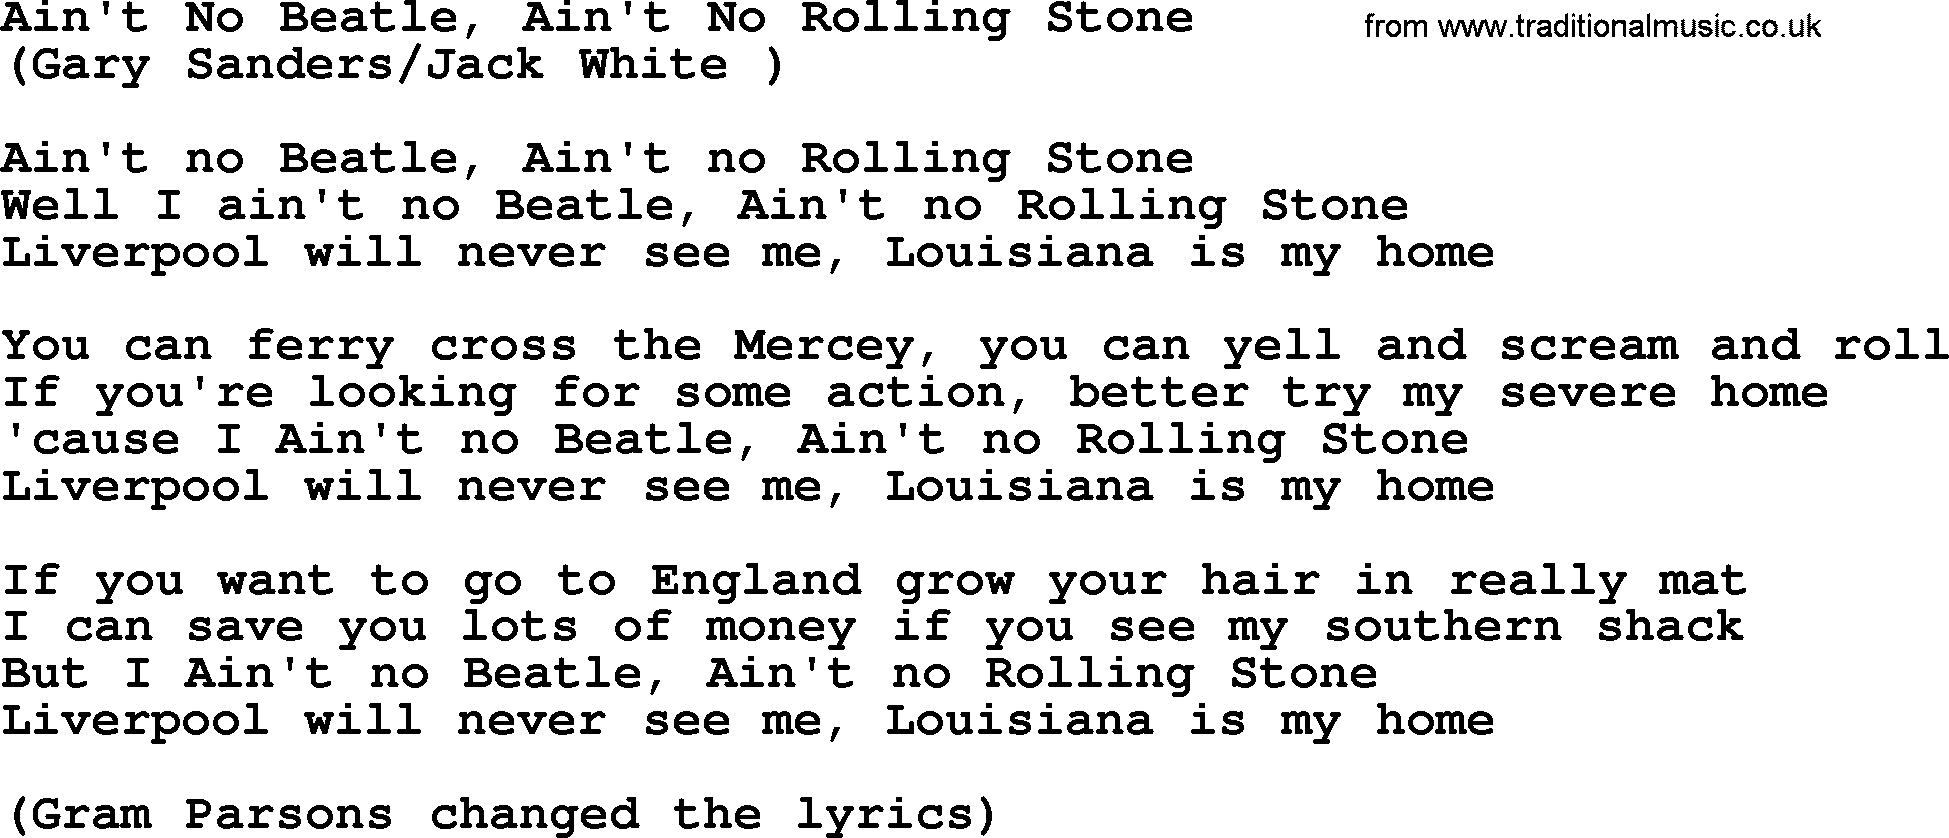 The Byrds song Ain't No Beatle, Ain't No Rolling Stone, lyrics